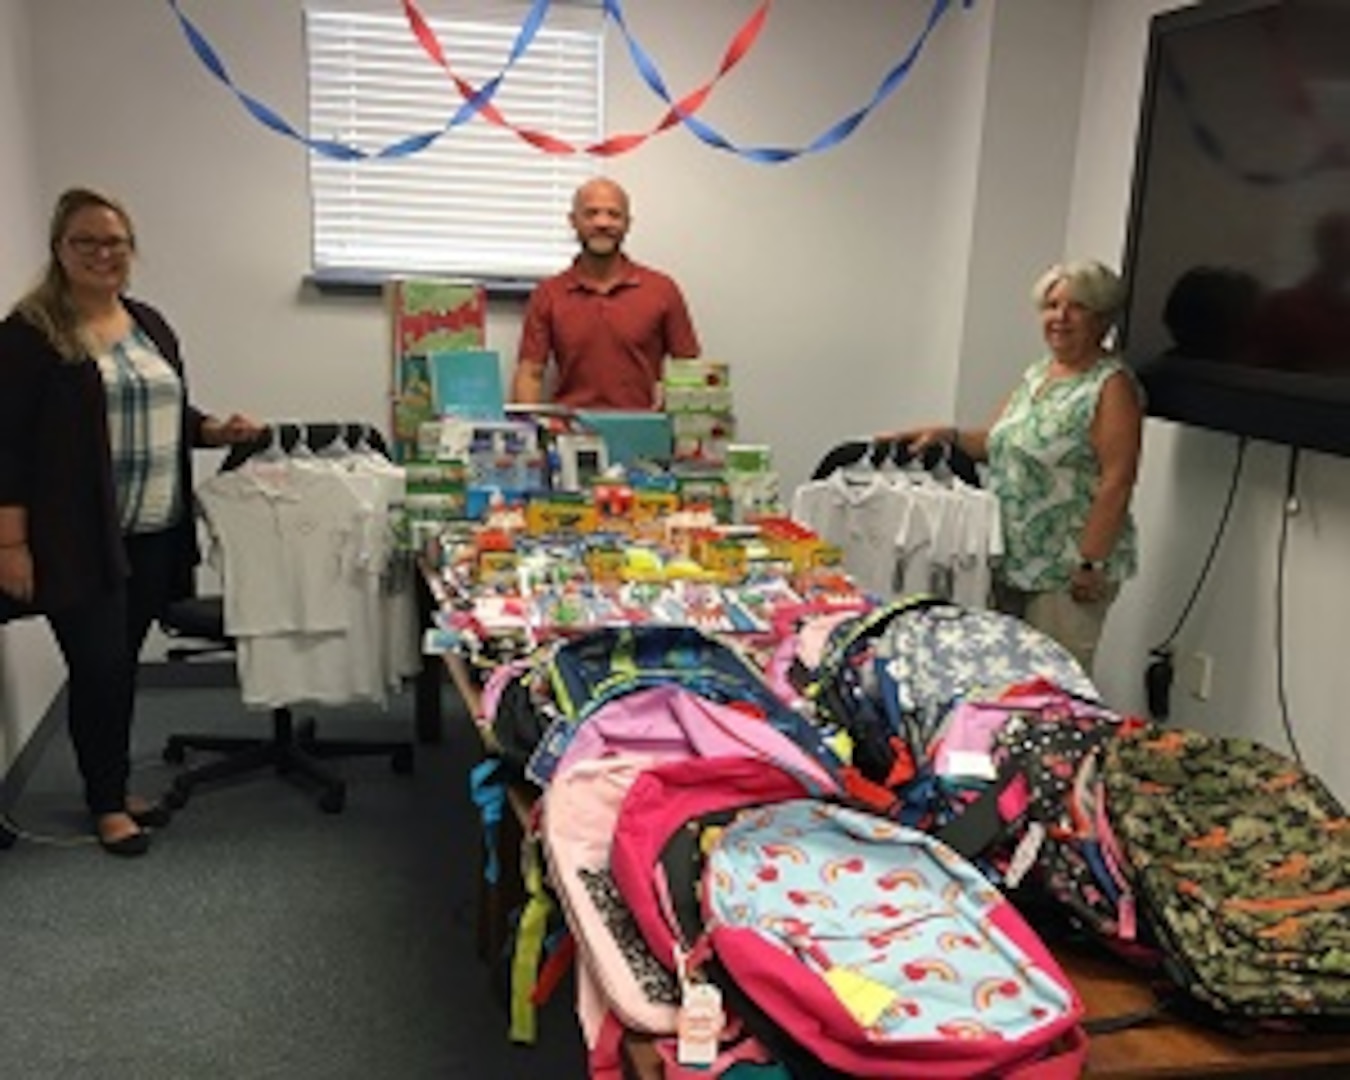 PANAMA CITY, Florida - Members of the Naval Surface Warfare Center Panama City Division (NSWC PCD) Test and Evaluation Prototype Fabrication Division share the assortment of school supplies to be donated. The group worked within their division to collectively provide supplies to children in need. Pictured from left to right: Nicole Waters, Dr. Ben Schlorholtz, and Paula Oliver. U.S. Navy photo by Susan H. Lawson